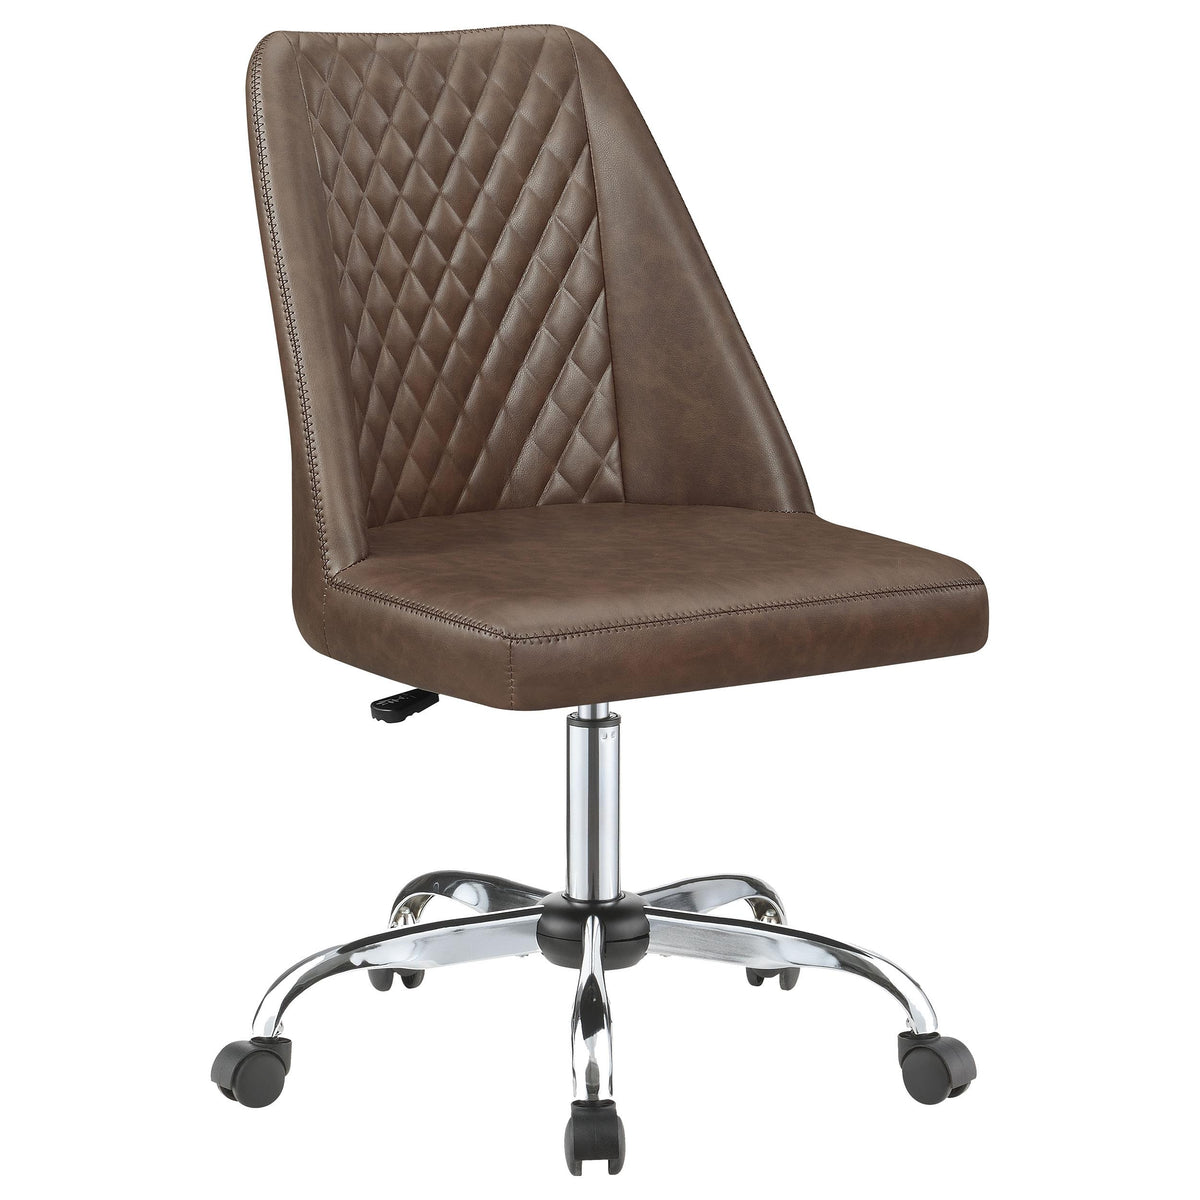 Althea Upholstered Tufted Back Office Chair Brown and Chrome  Half Price Furniture